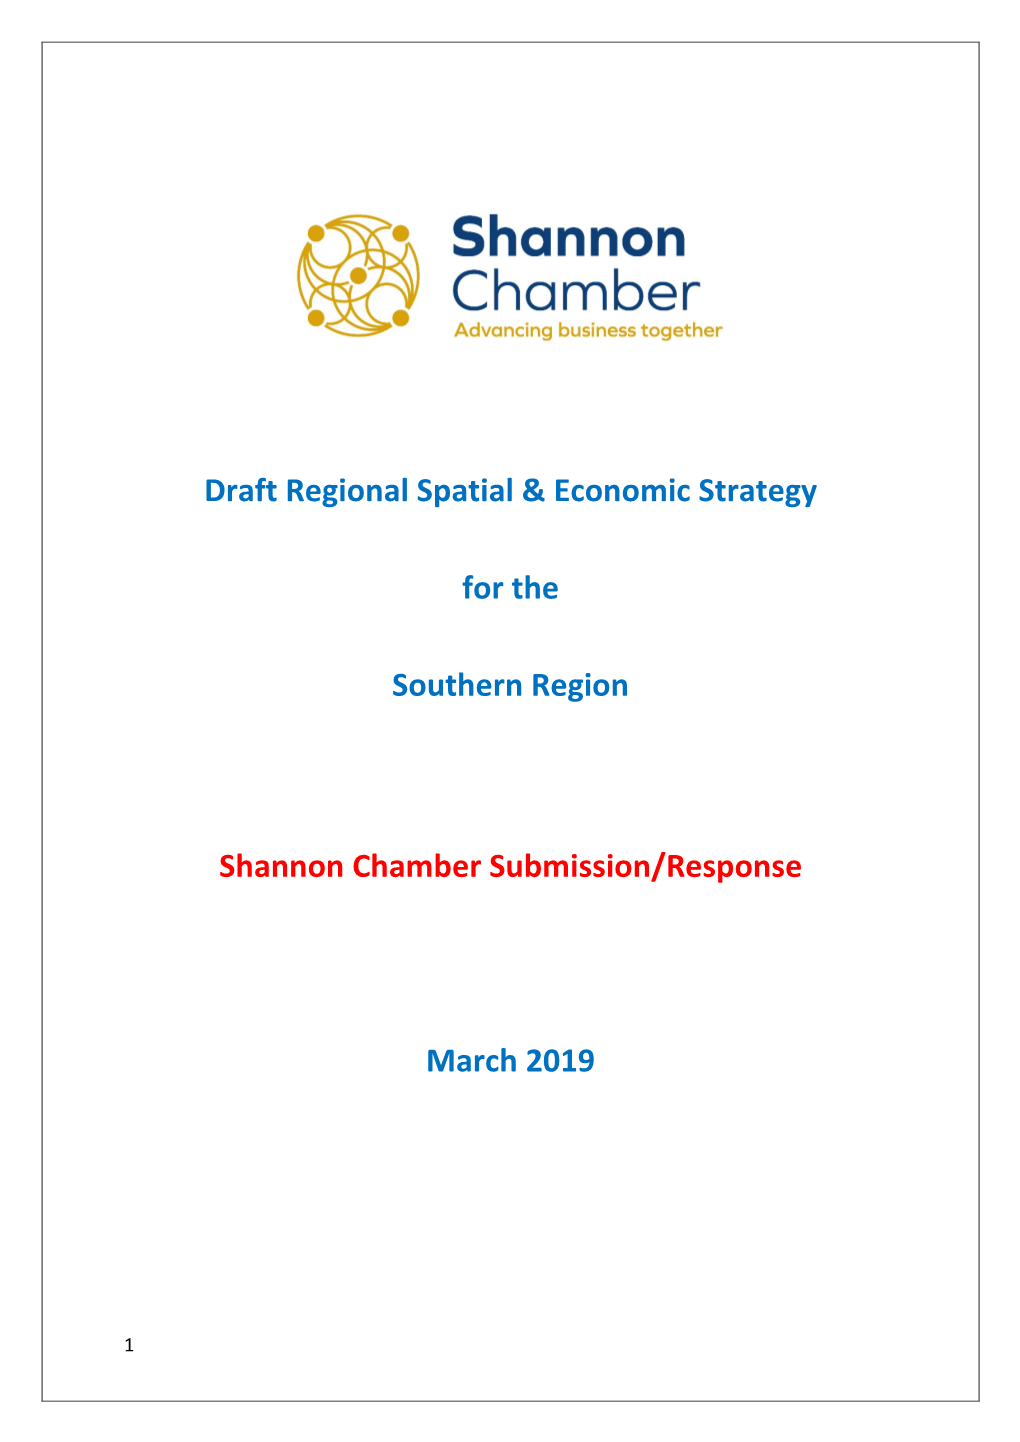 Draft Regional Spatial & Economic Strategy for the Southern Region